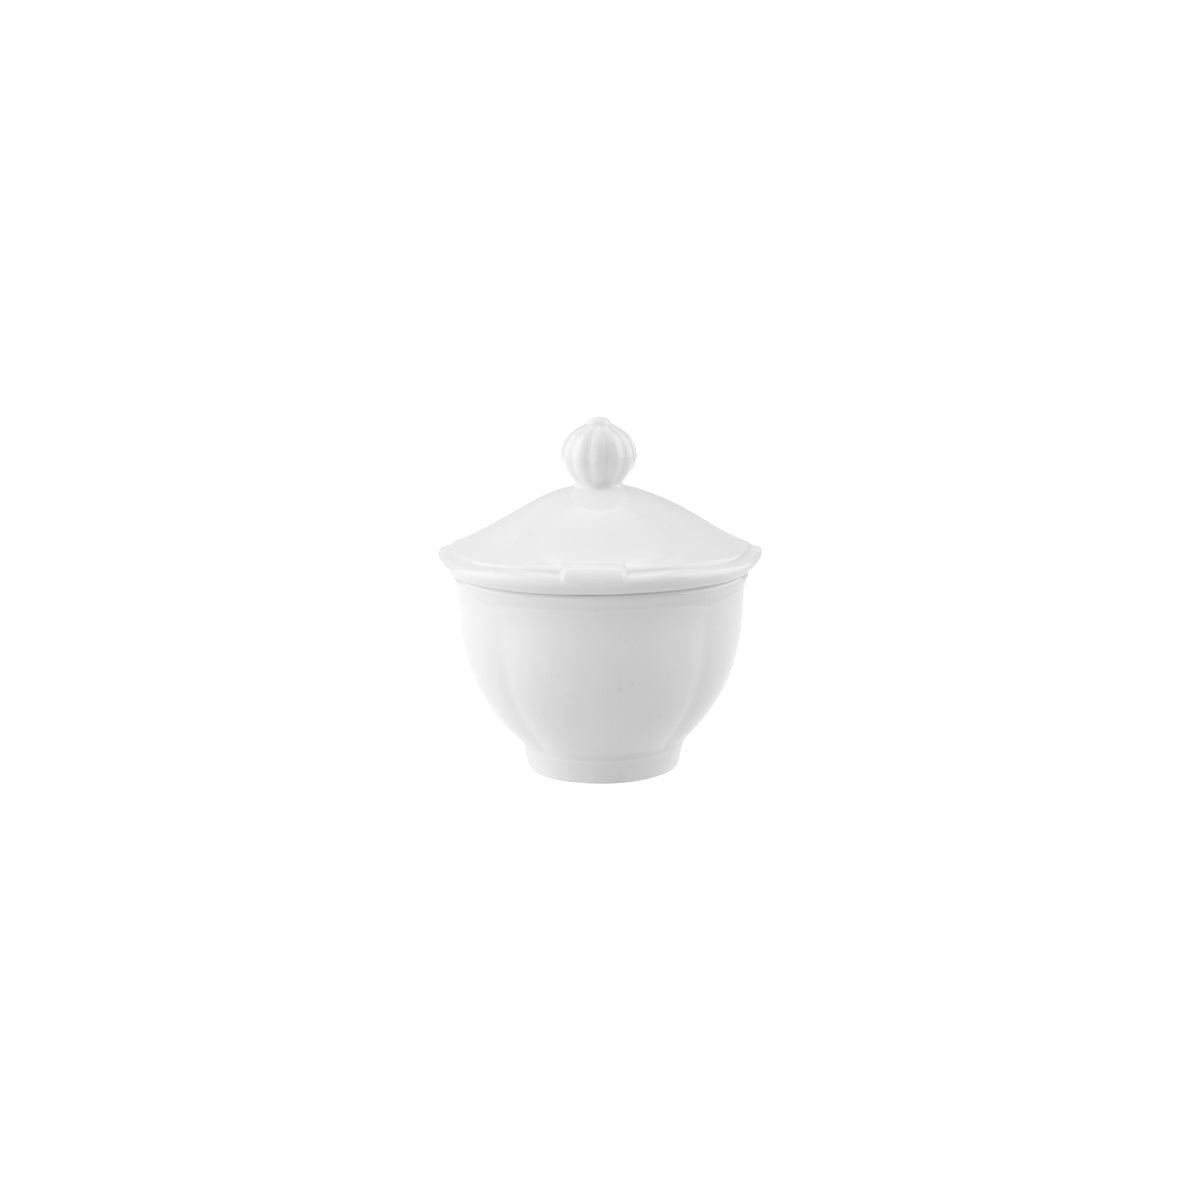 VB16-3318-0930 Villeroy And Boch Villeroy And Boch La Scala White Sugar Bowl with Lid 220ml Tomkin Australia Hospitality Supplies